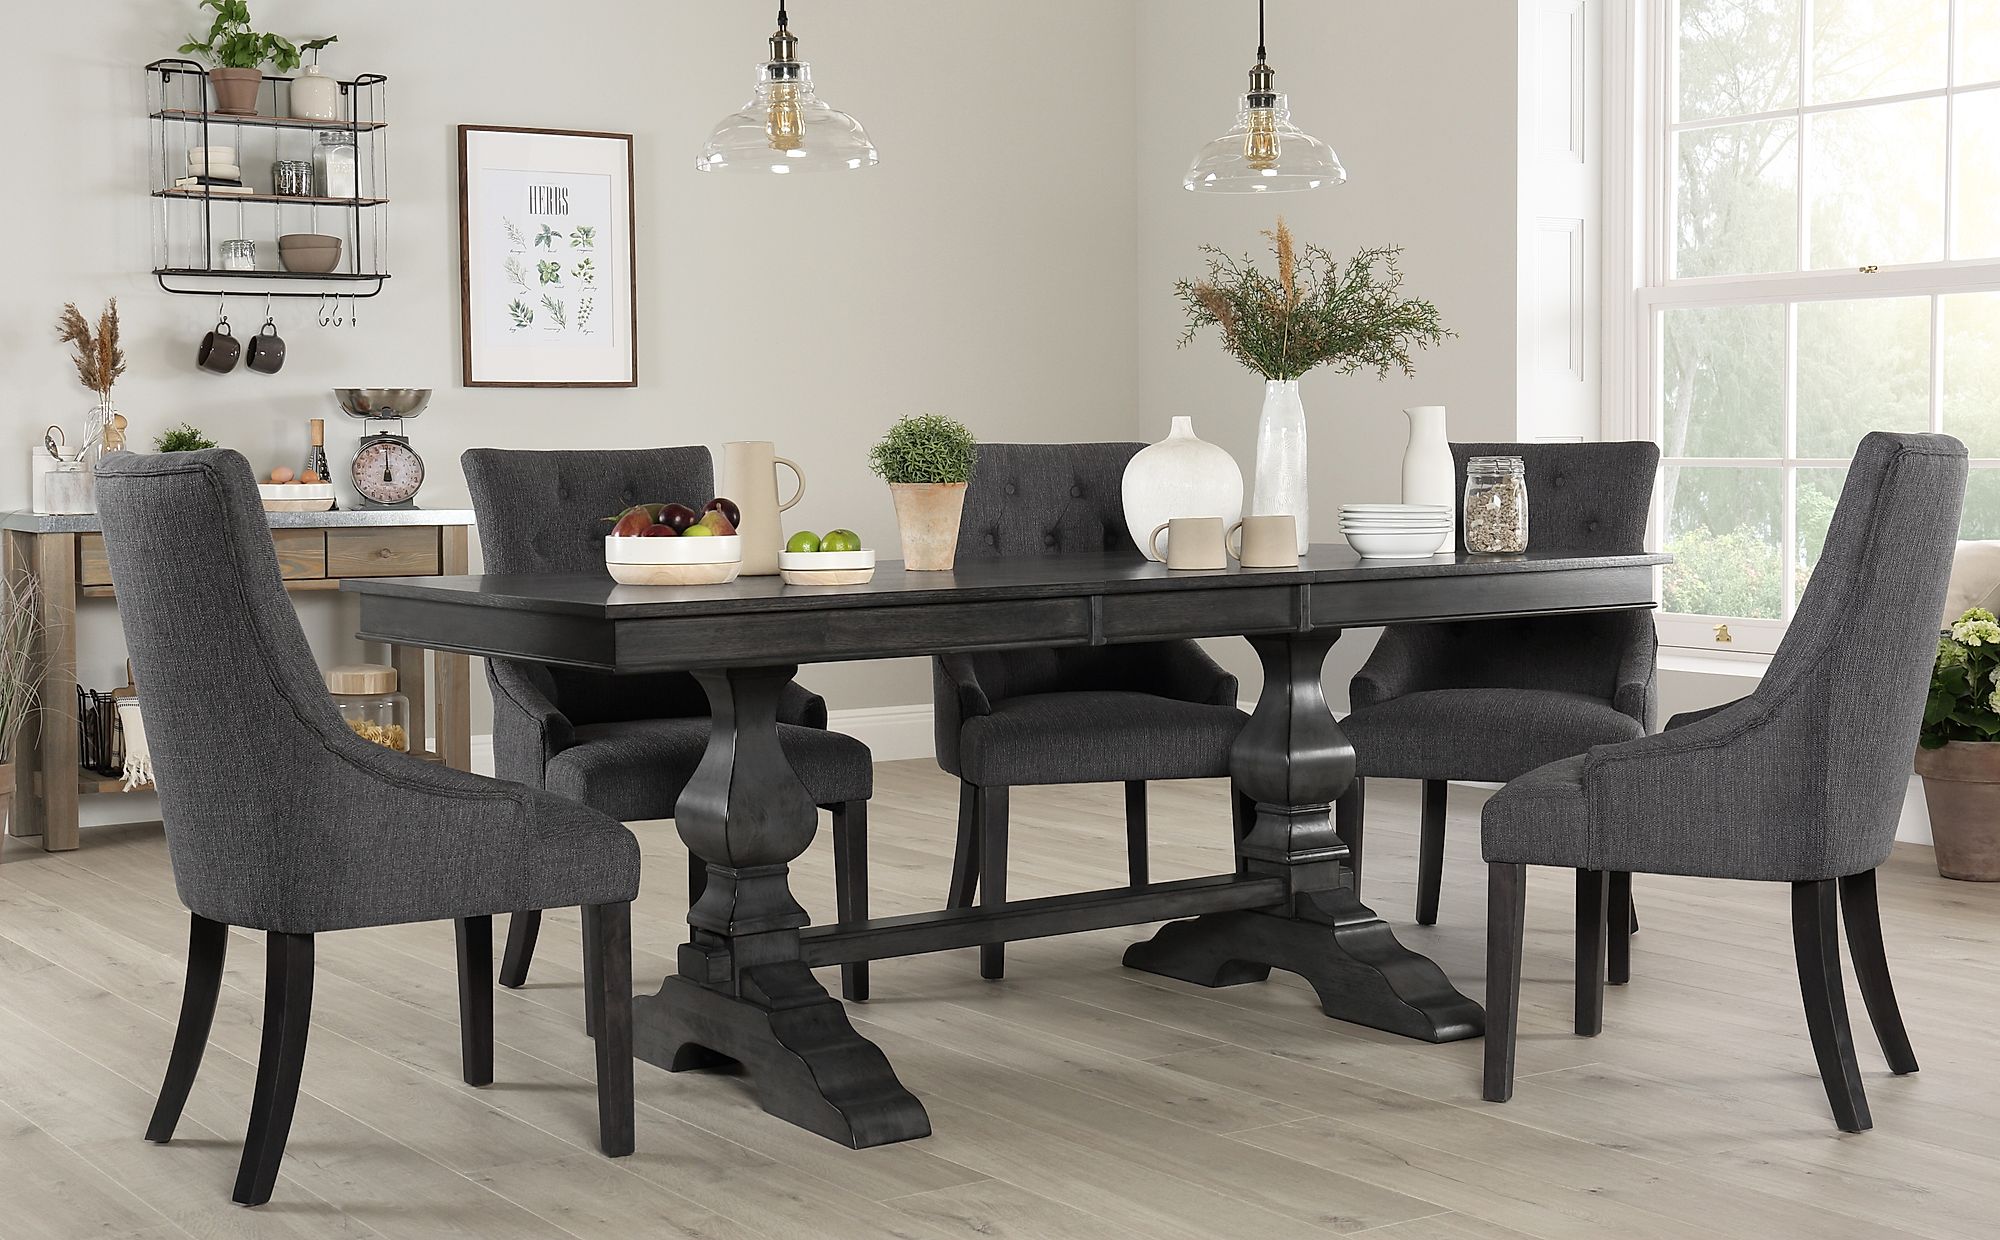 Dining Room Table With Grey Fabric Chairs